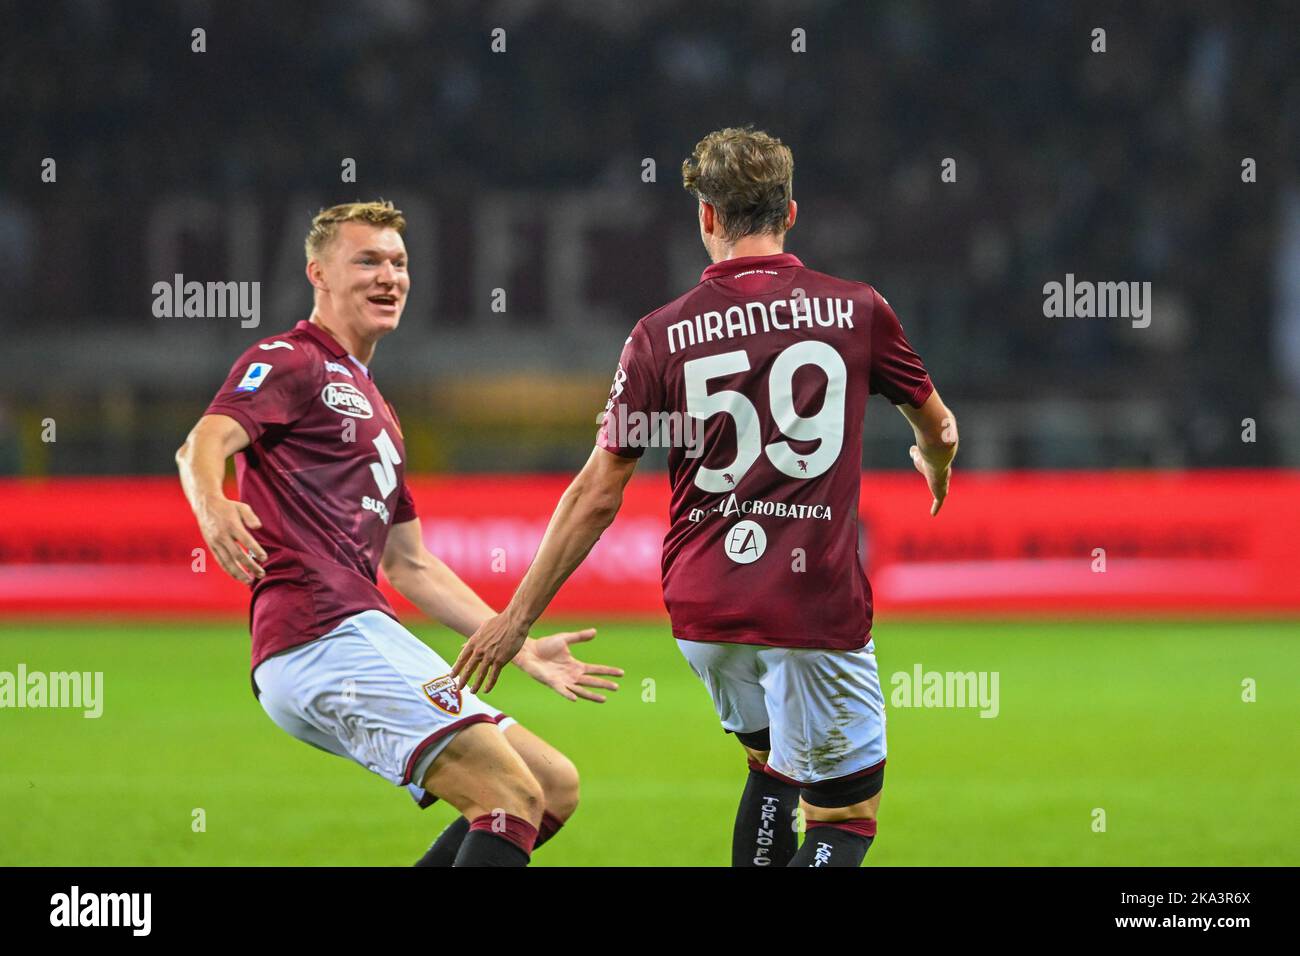 Aleksey Miranchuk of Torino FC, during the Serie A match between Torino FC and AC Milan on October, 30th, 2022 at Stadio Olimpico Grande Torino in Torino, Italy. Picture by Antonio Polia/Alphapress Stock Photo